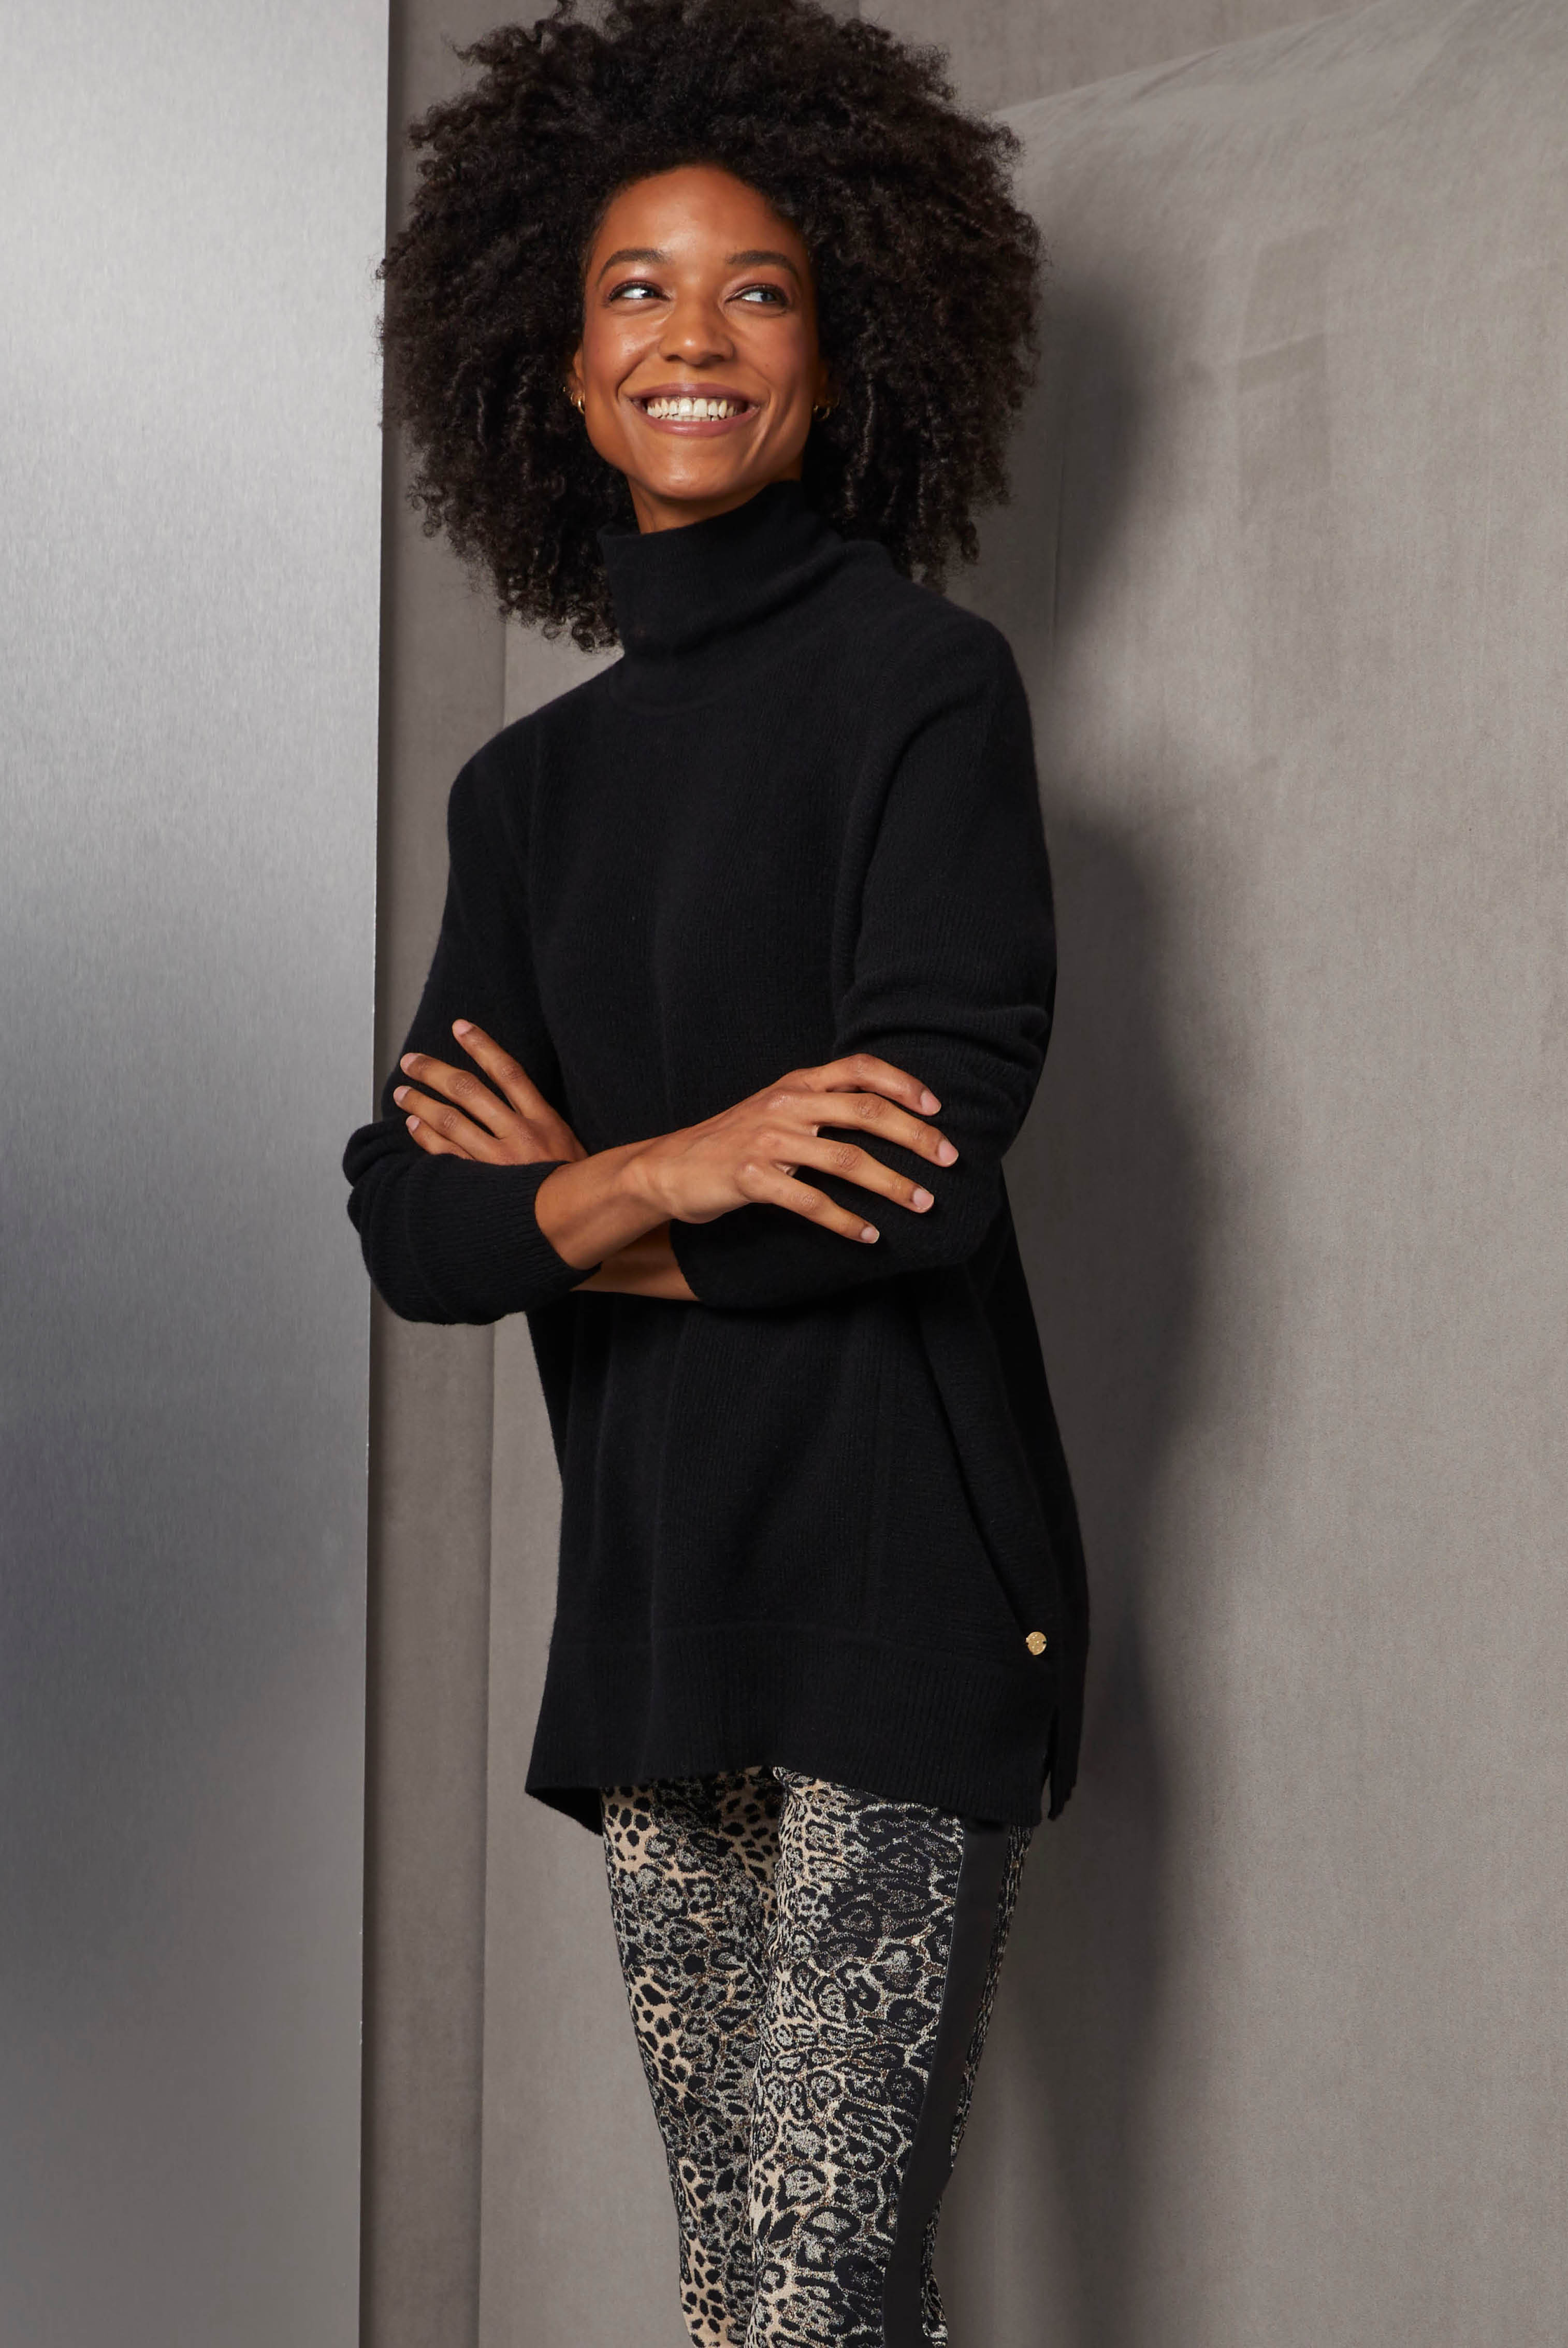 Cultivate your downtown aura with this oversized cashmere turtleneck in black, textured with multi-directional rib stitches. The wow factor of its volume and luxury hand feel is complemented by the slim Italian jacquard ankle pants.